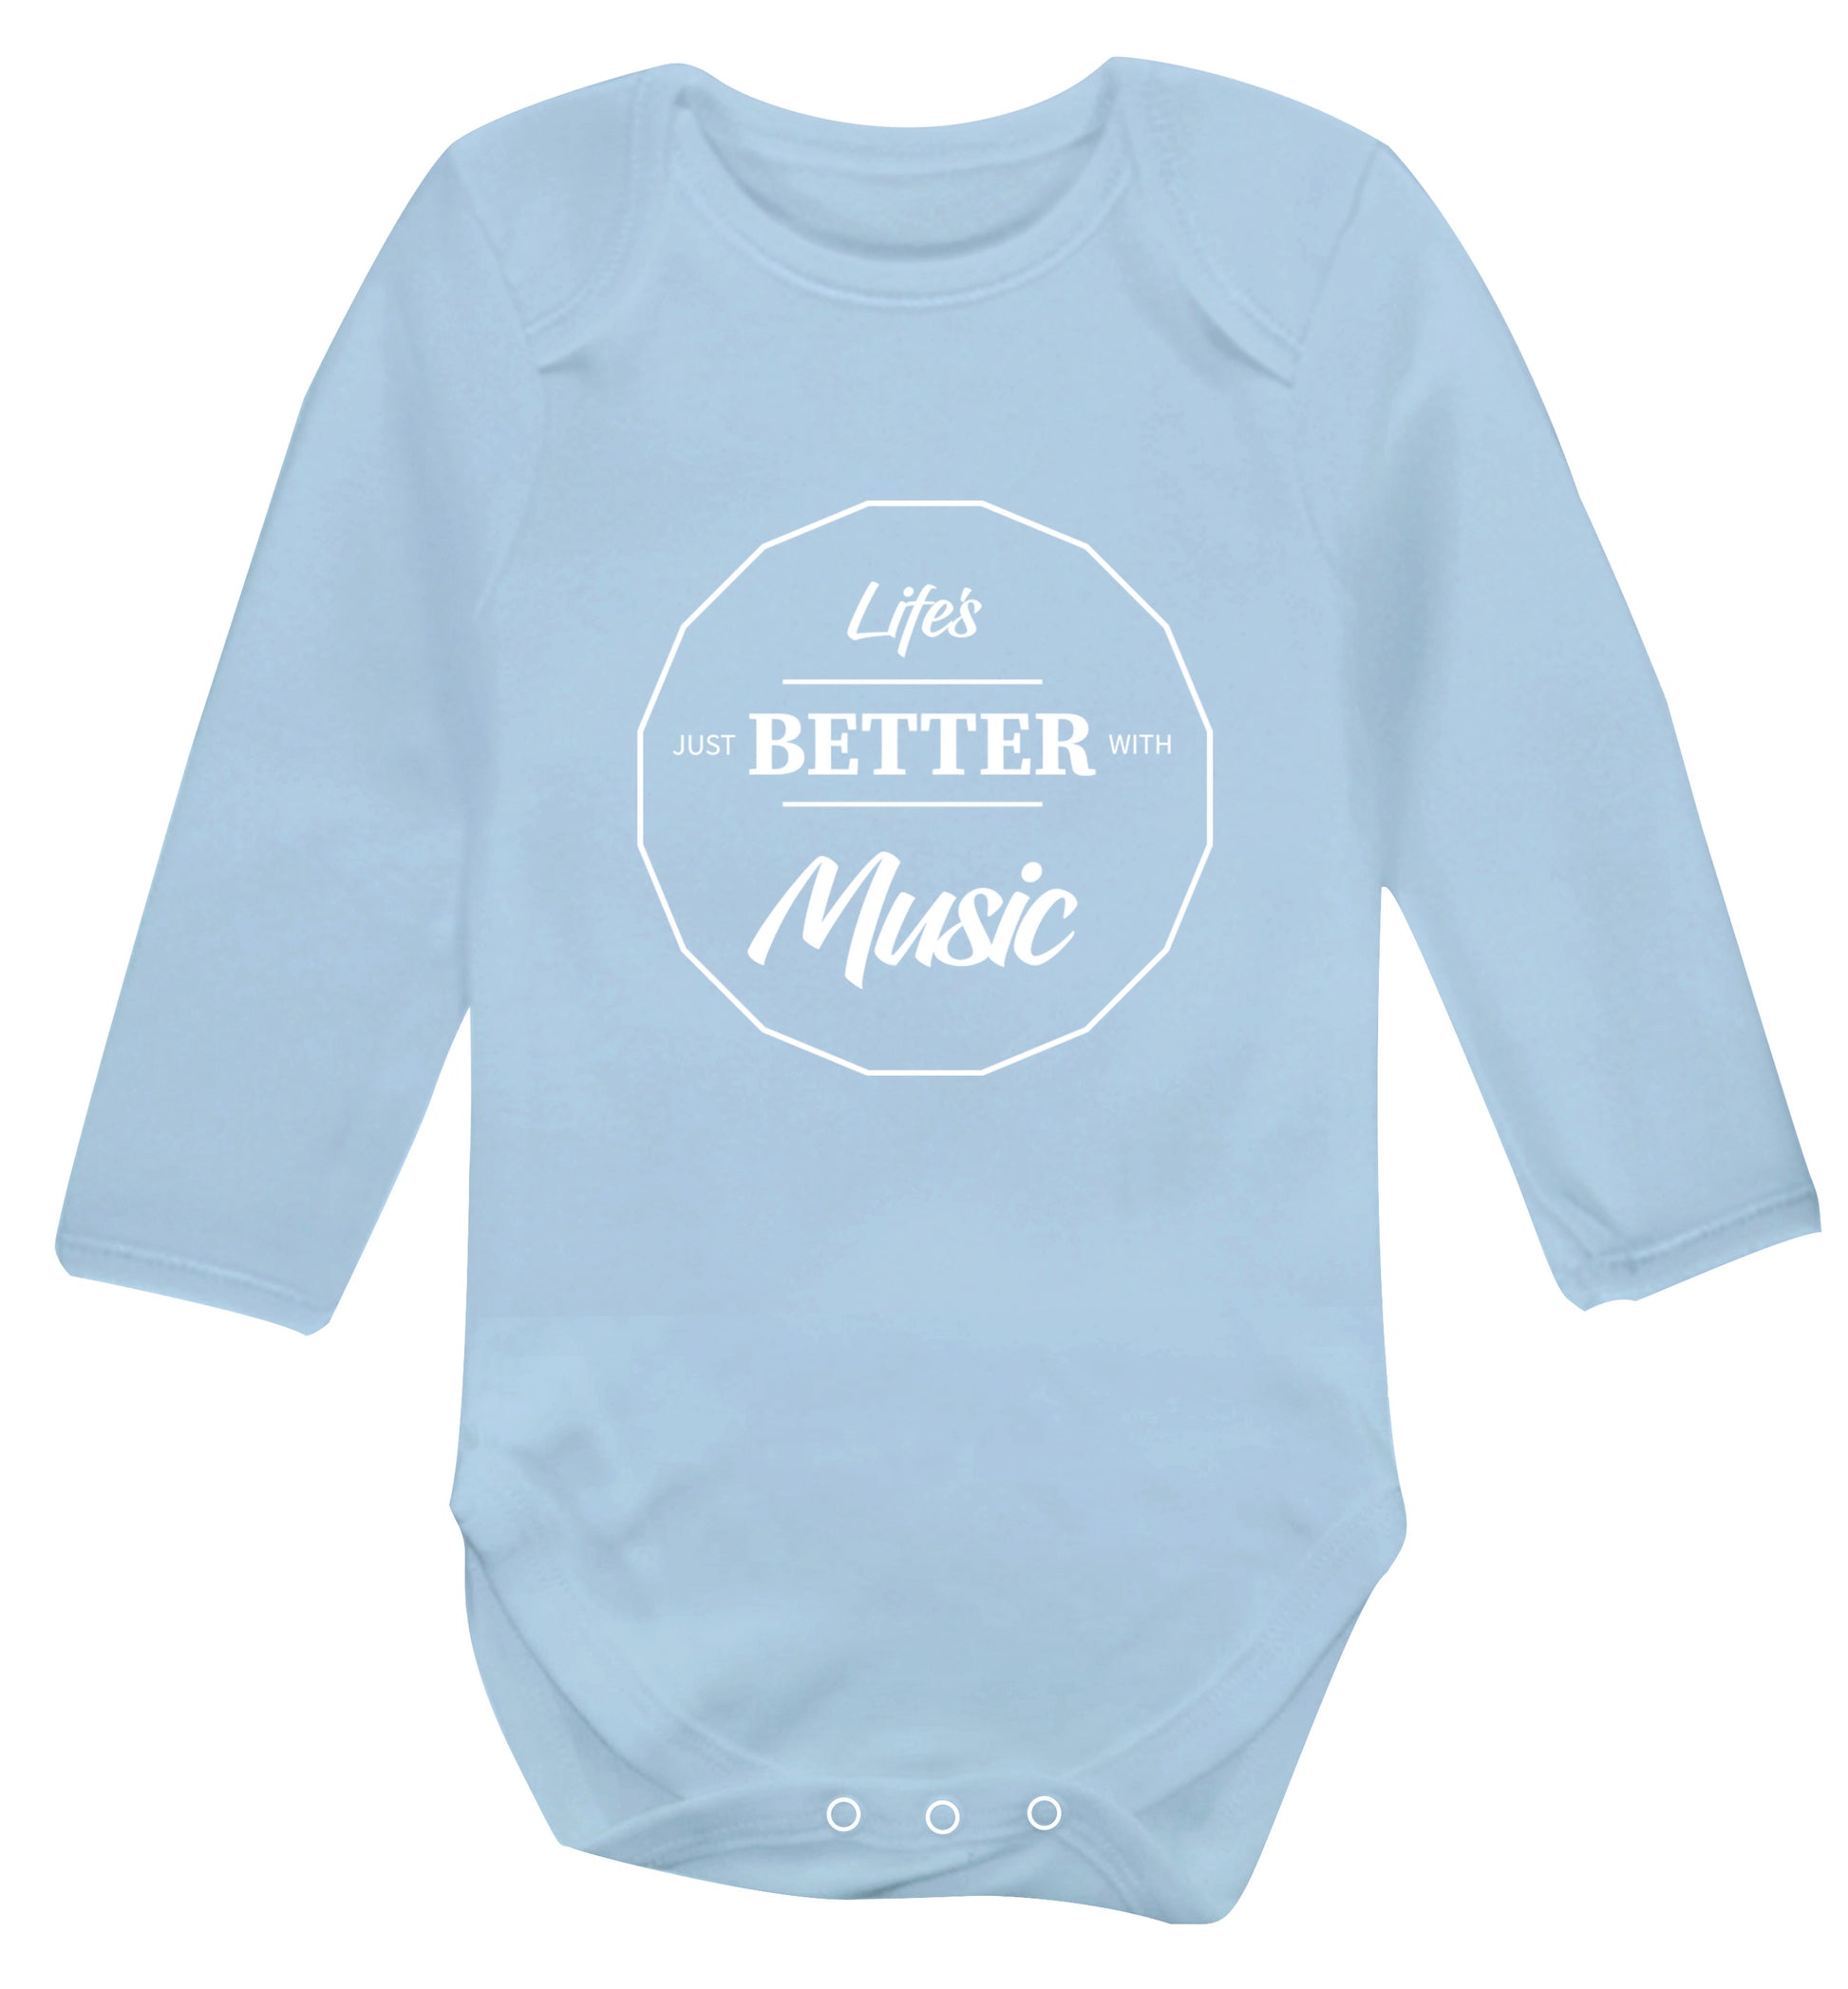 Life is Better With Music Baby Vest long sleeved pale blue 6-12 months